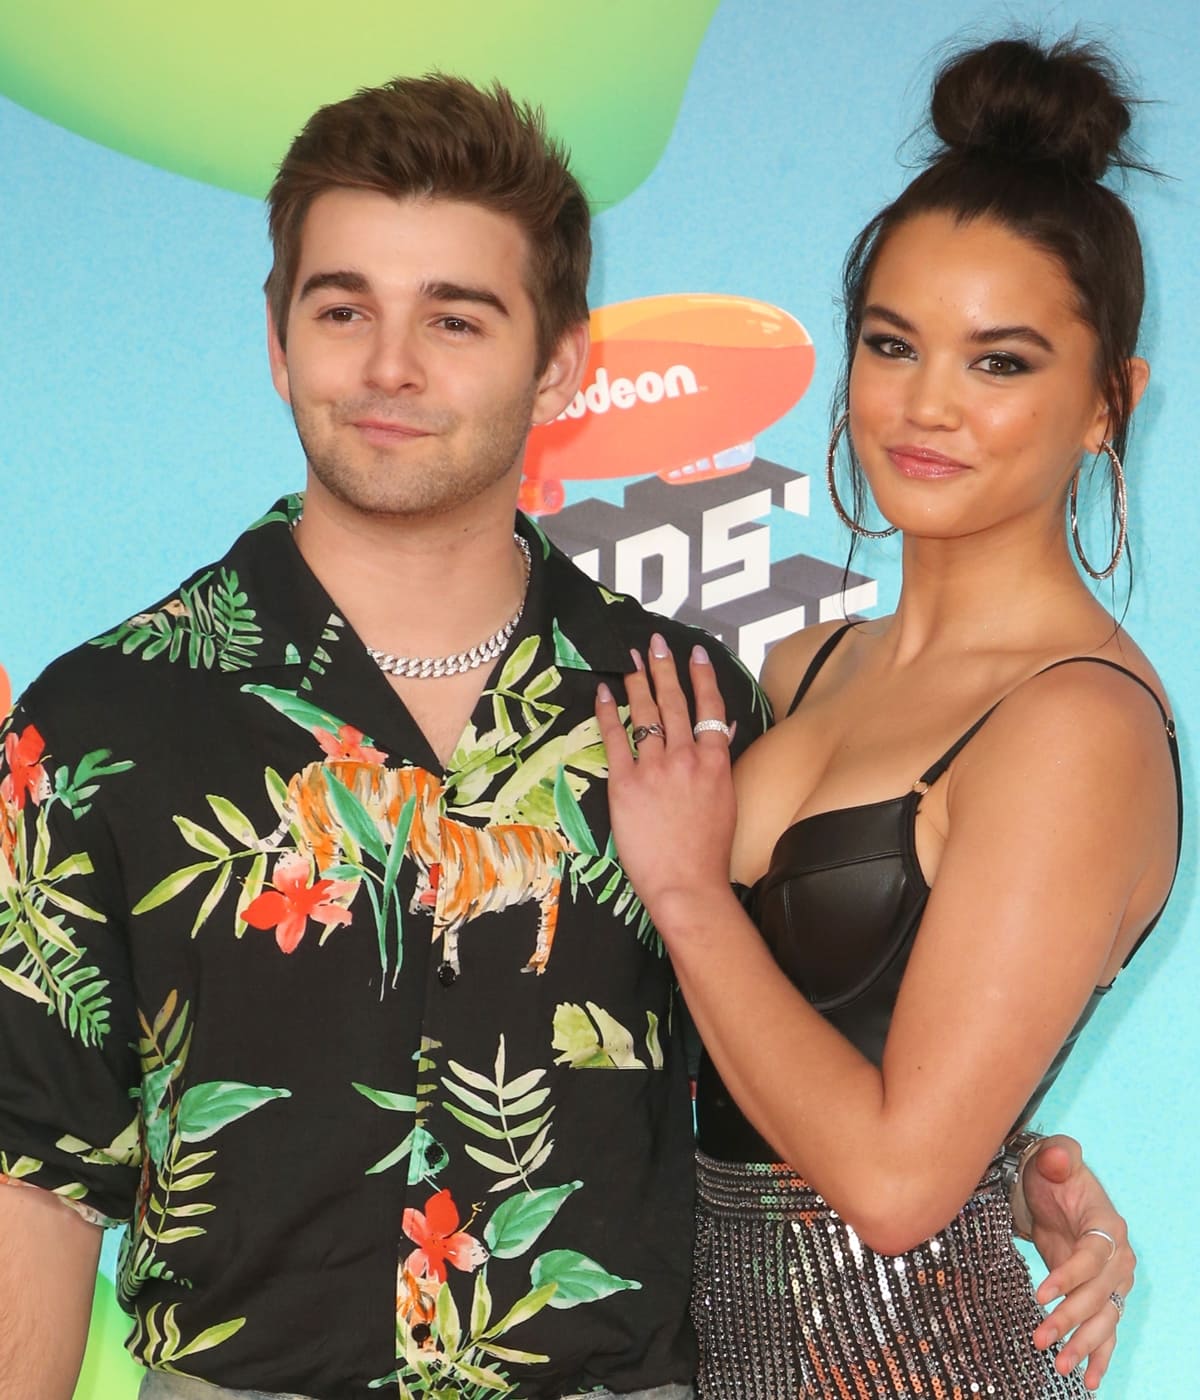 Paris Berelc and Jack Griffo dated on and off for three years and split in the summer of 2020